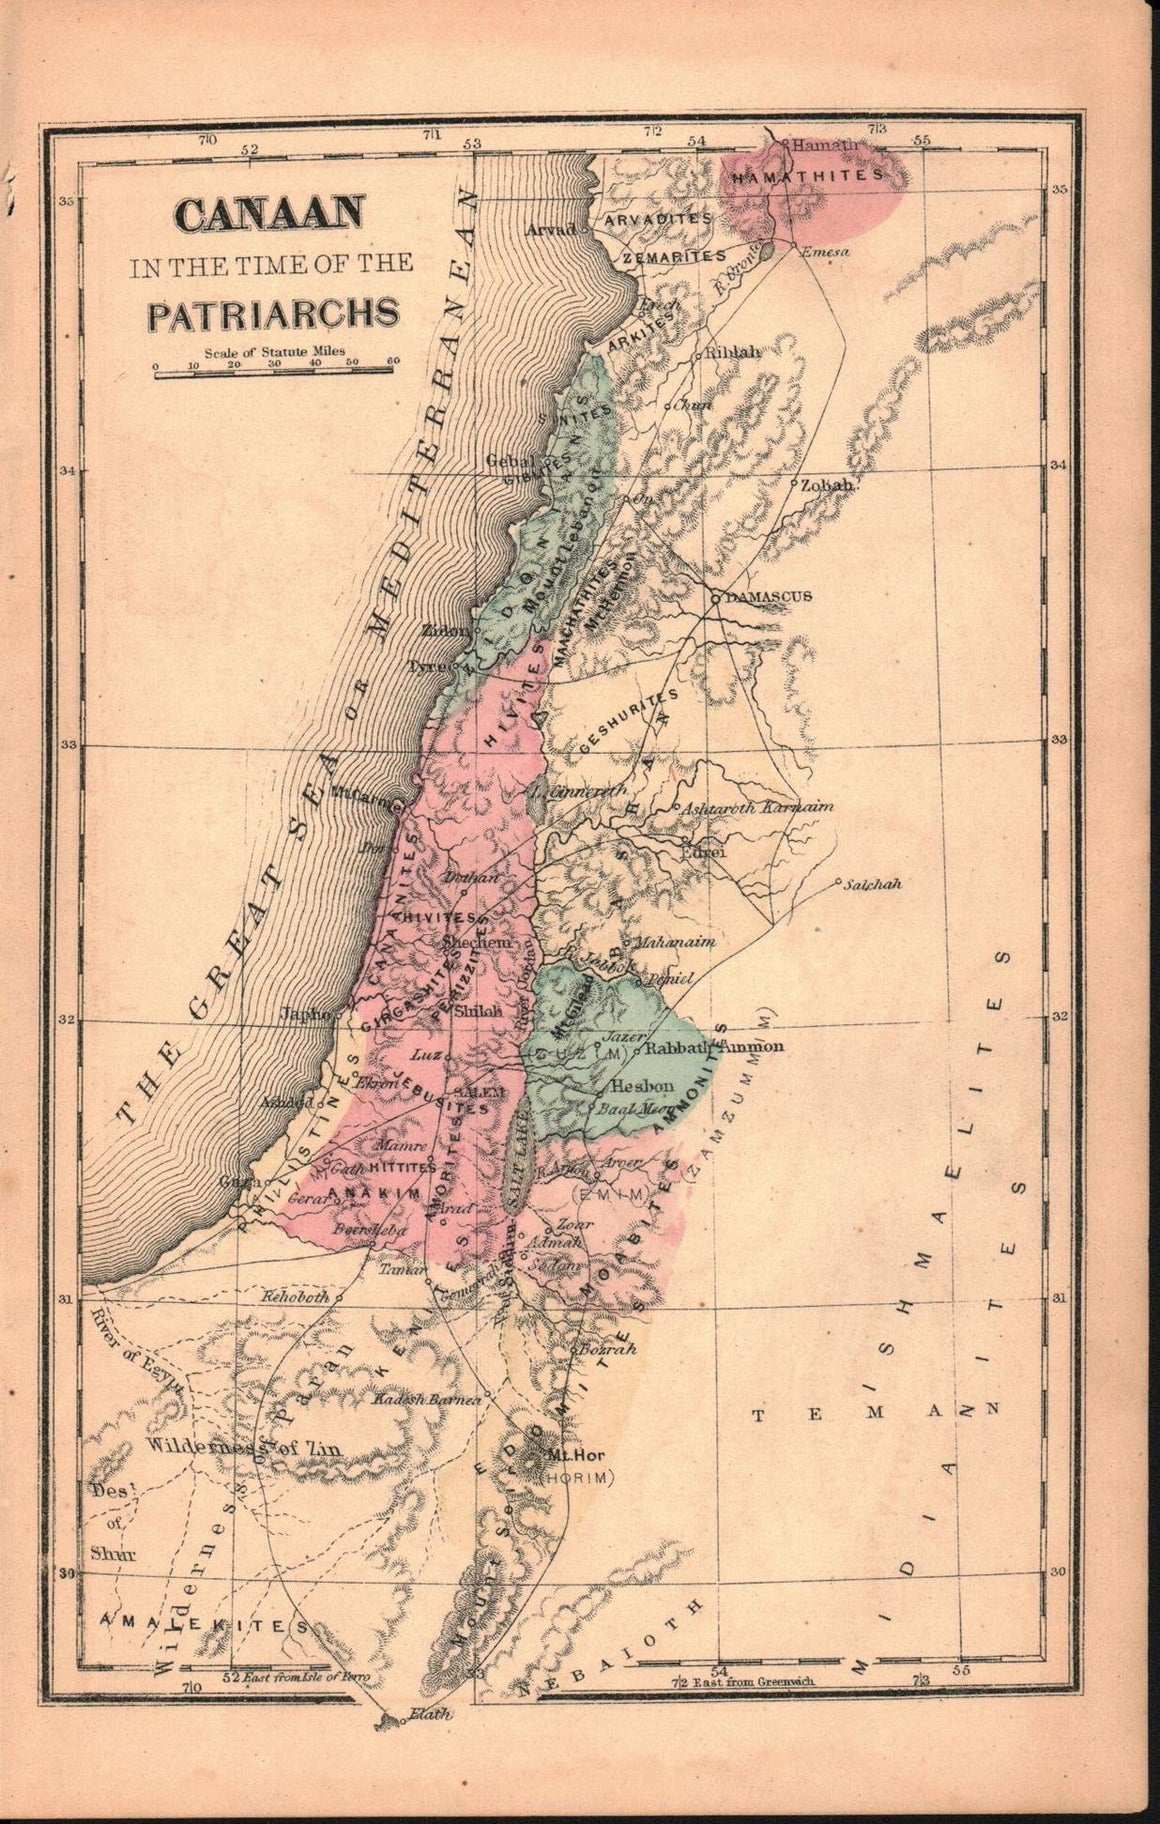 1870 Canaan in time of the Patriarchs - E Wells